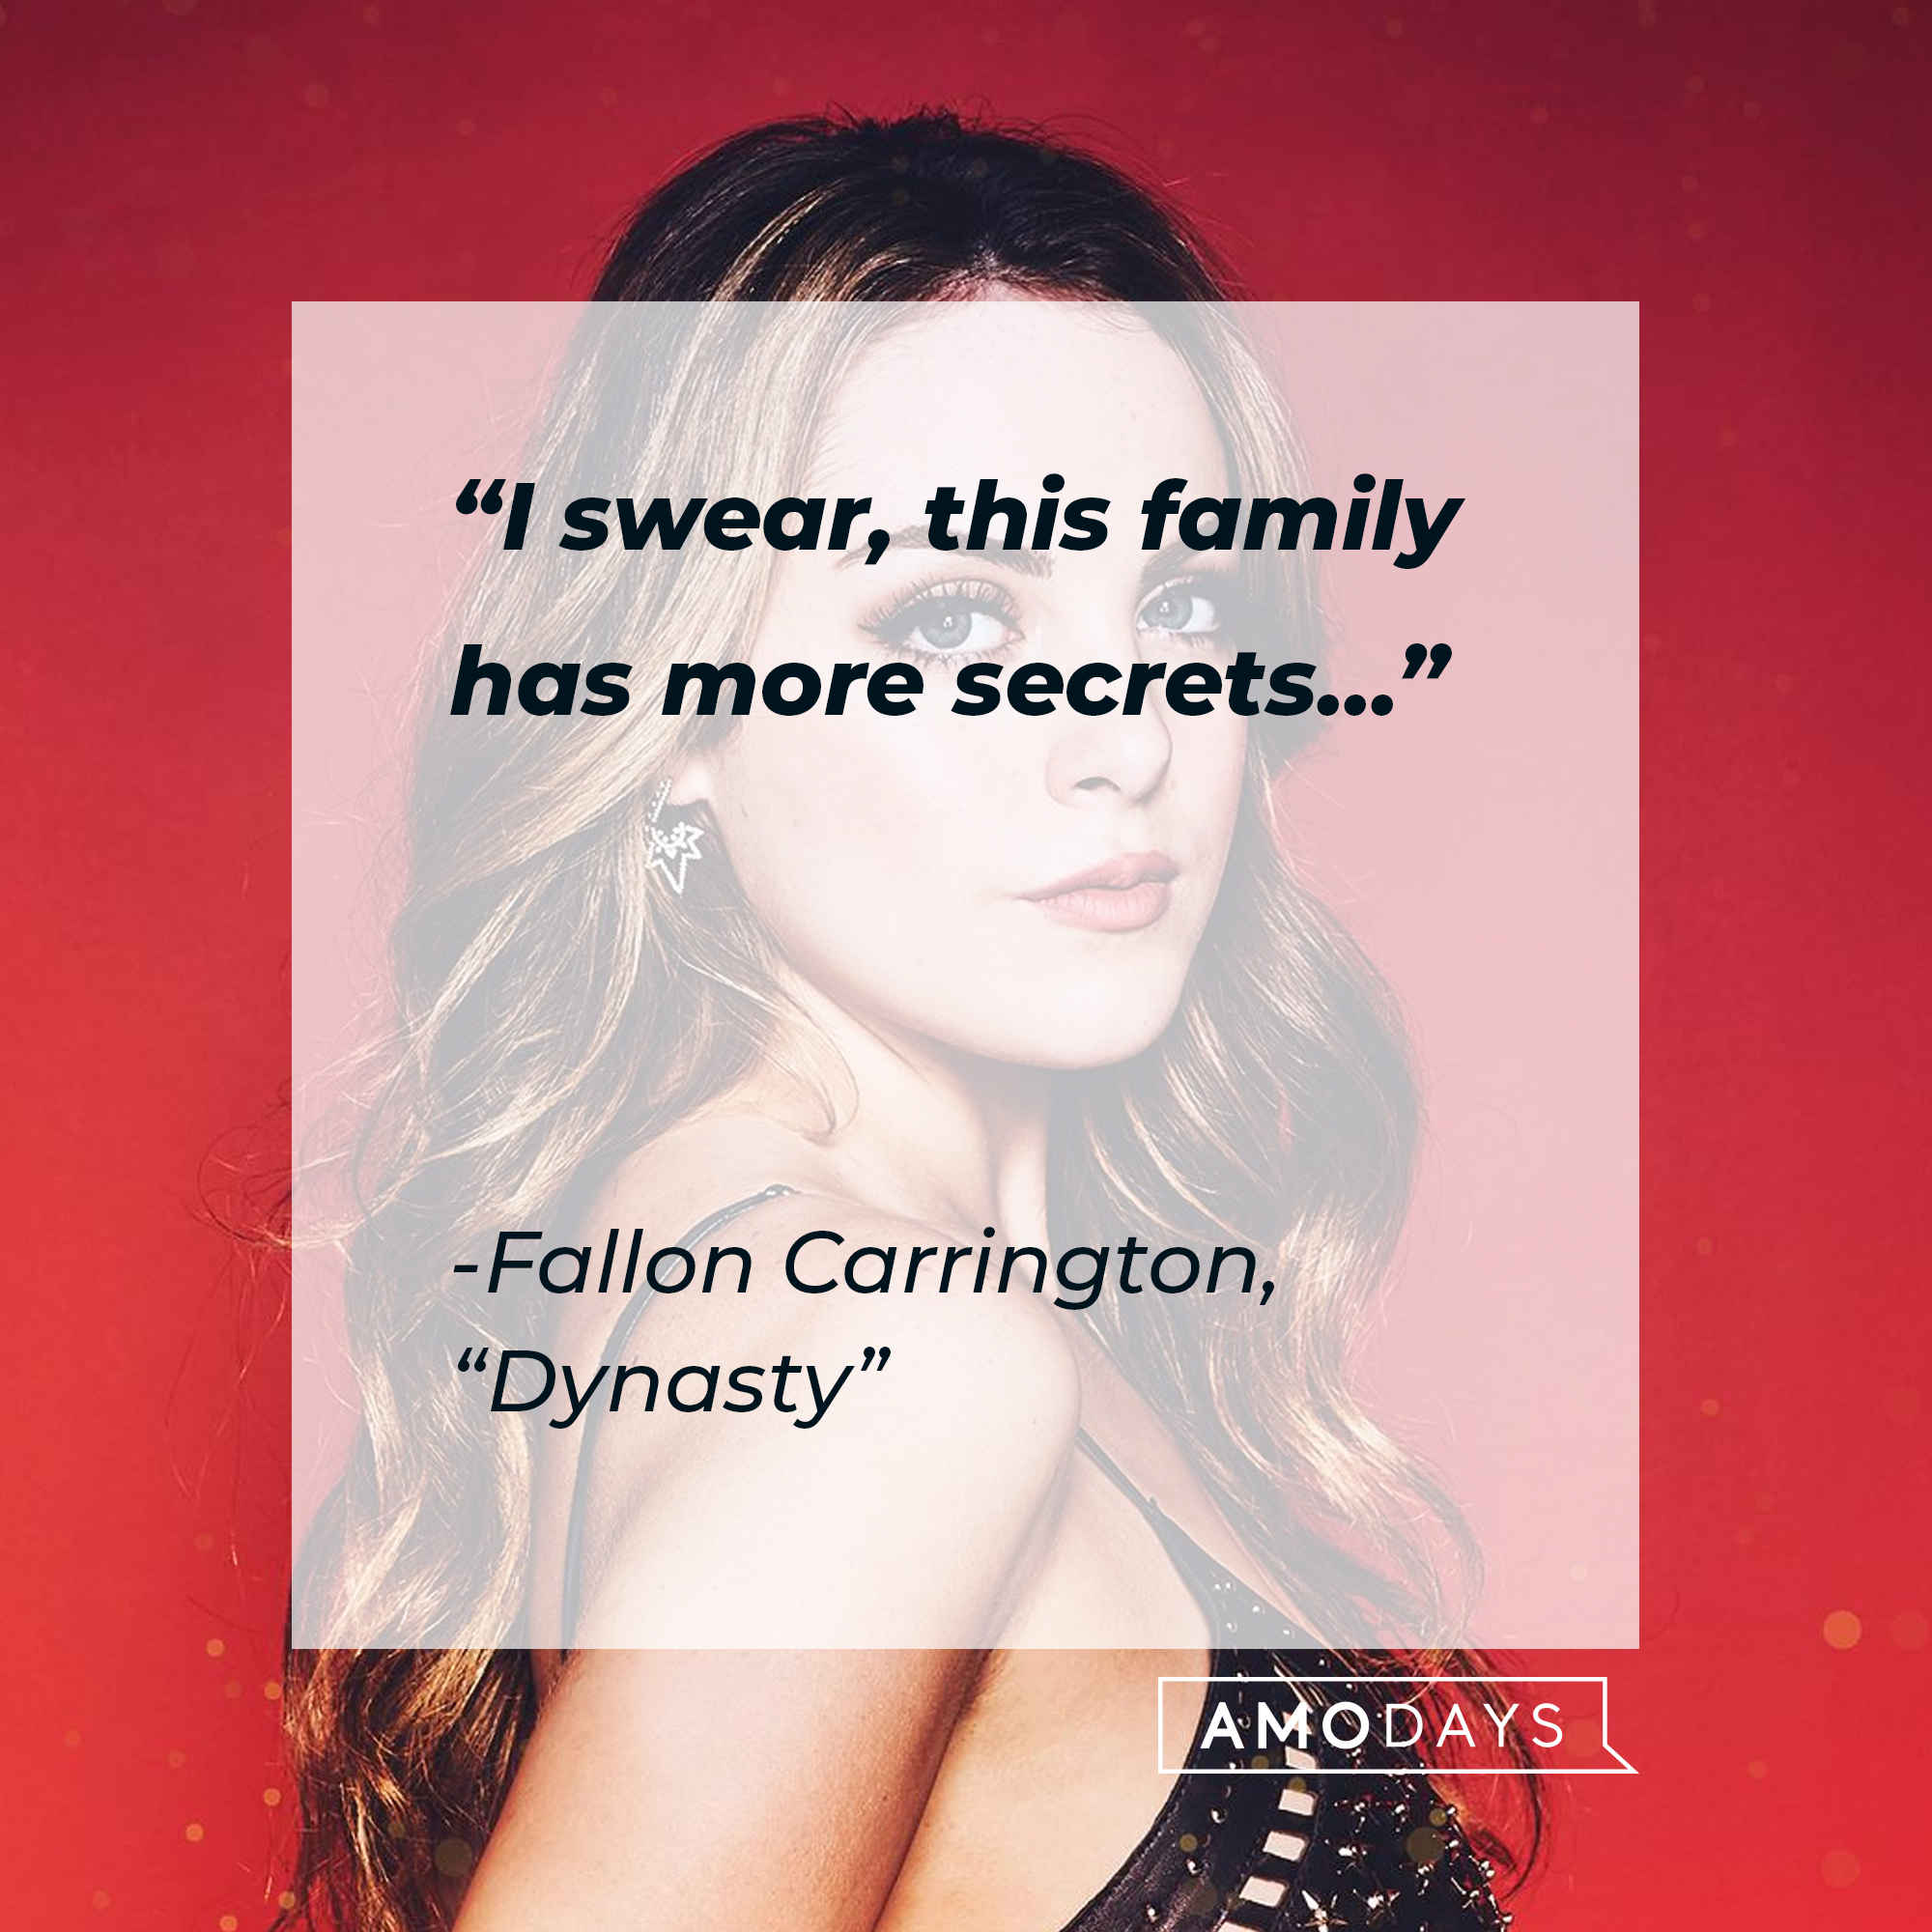 Fallon Carrington’s quote from “Dynasty”: “I swear, this family has more secrets…” | Source: facebook.com/DynastyOnTheCW